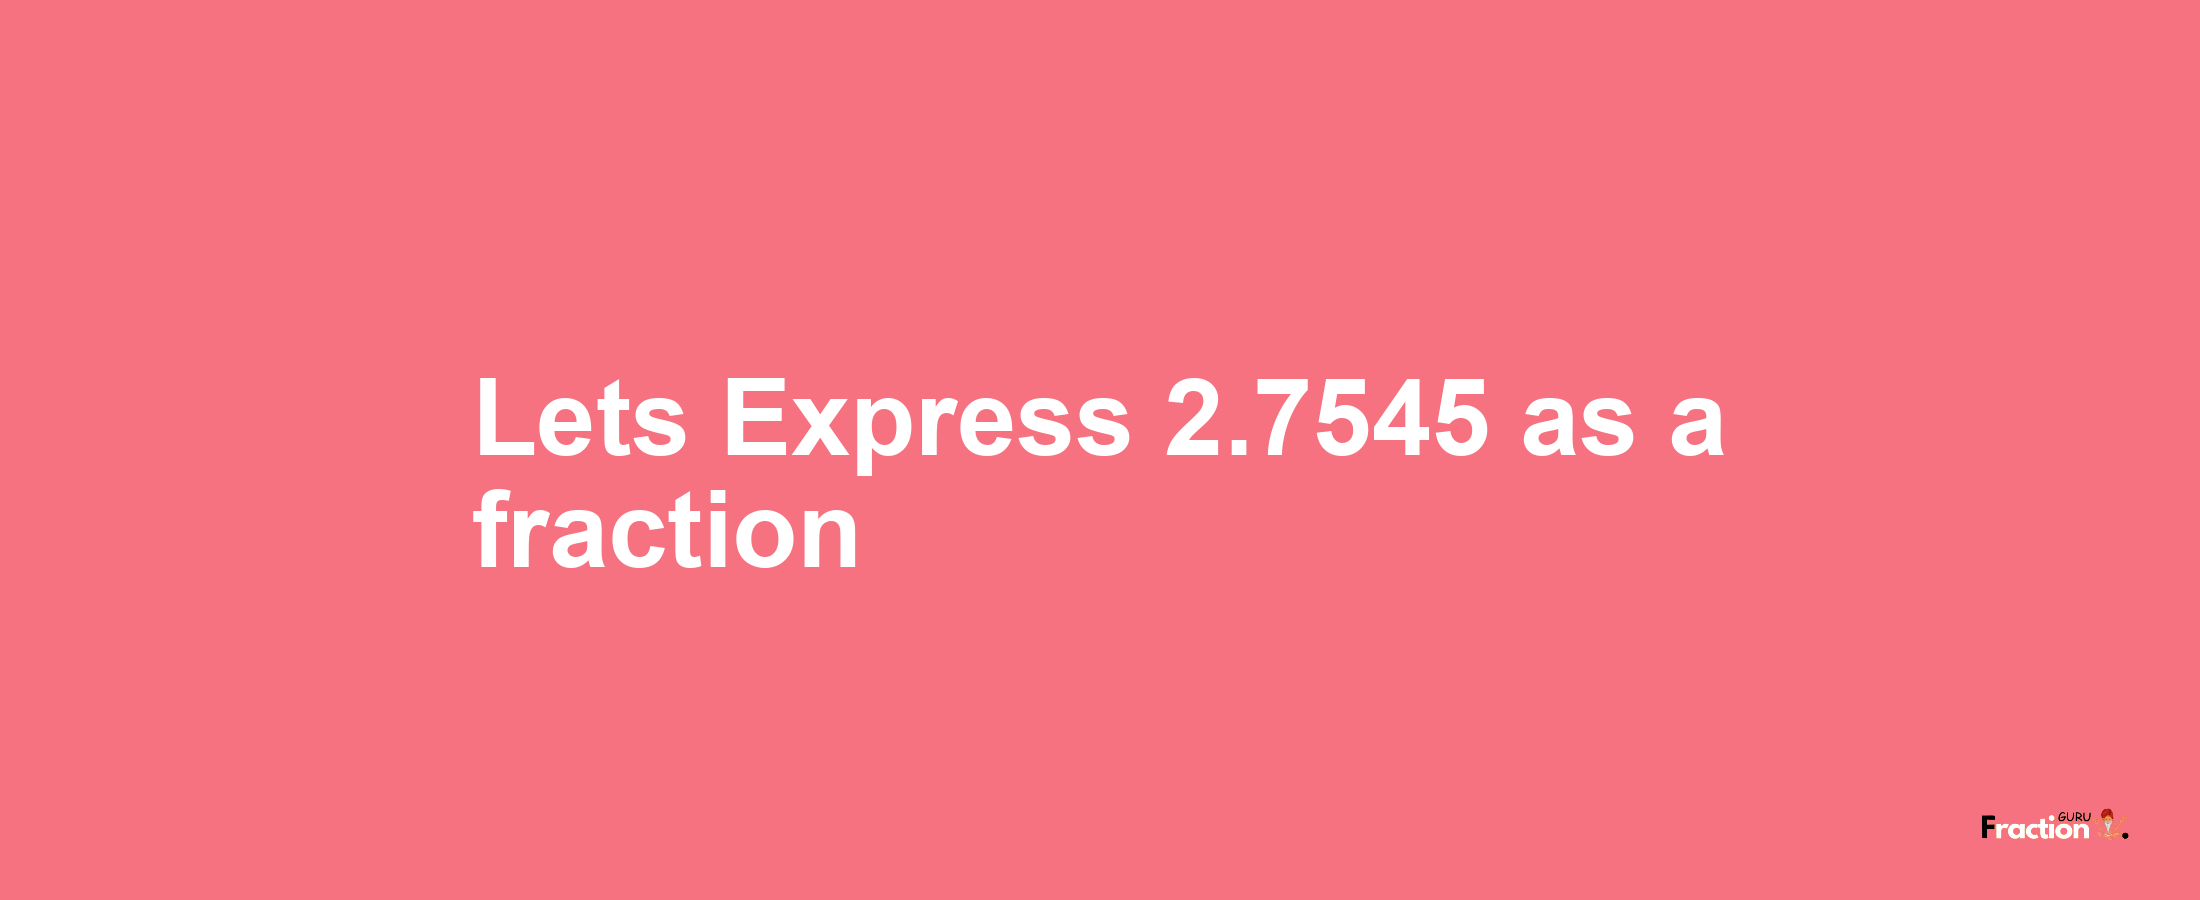 Lets Express 2.7545 as afraction